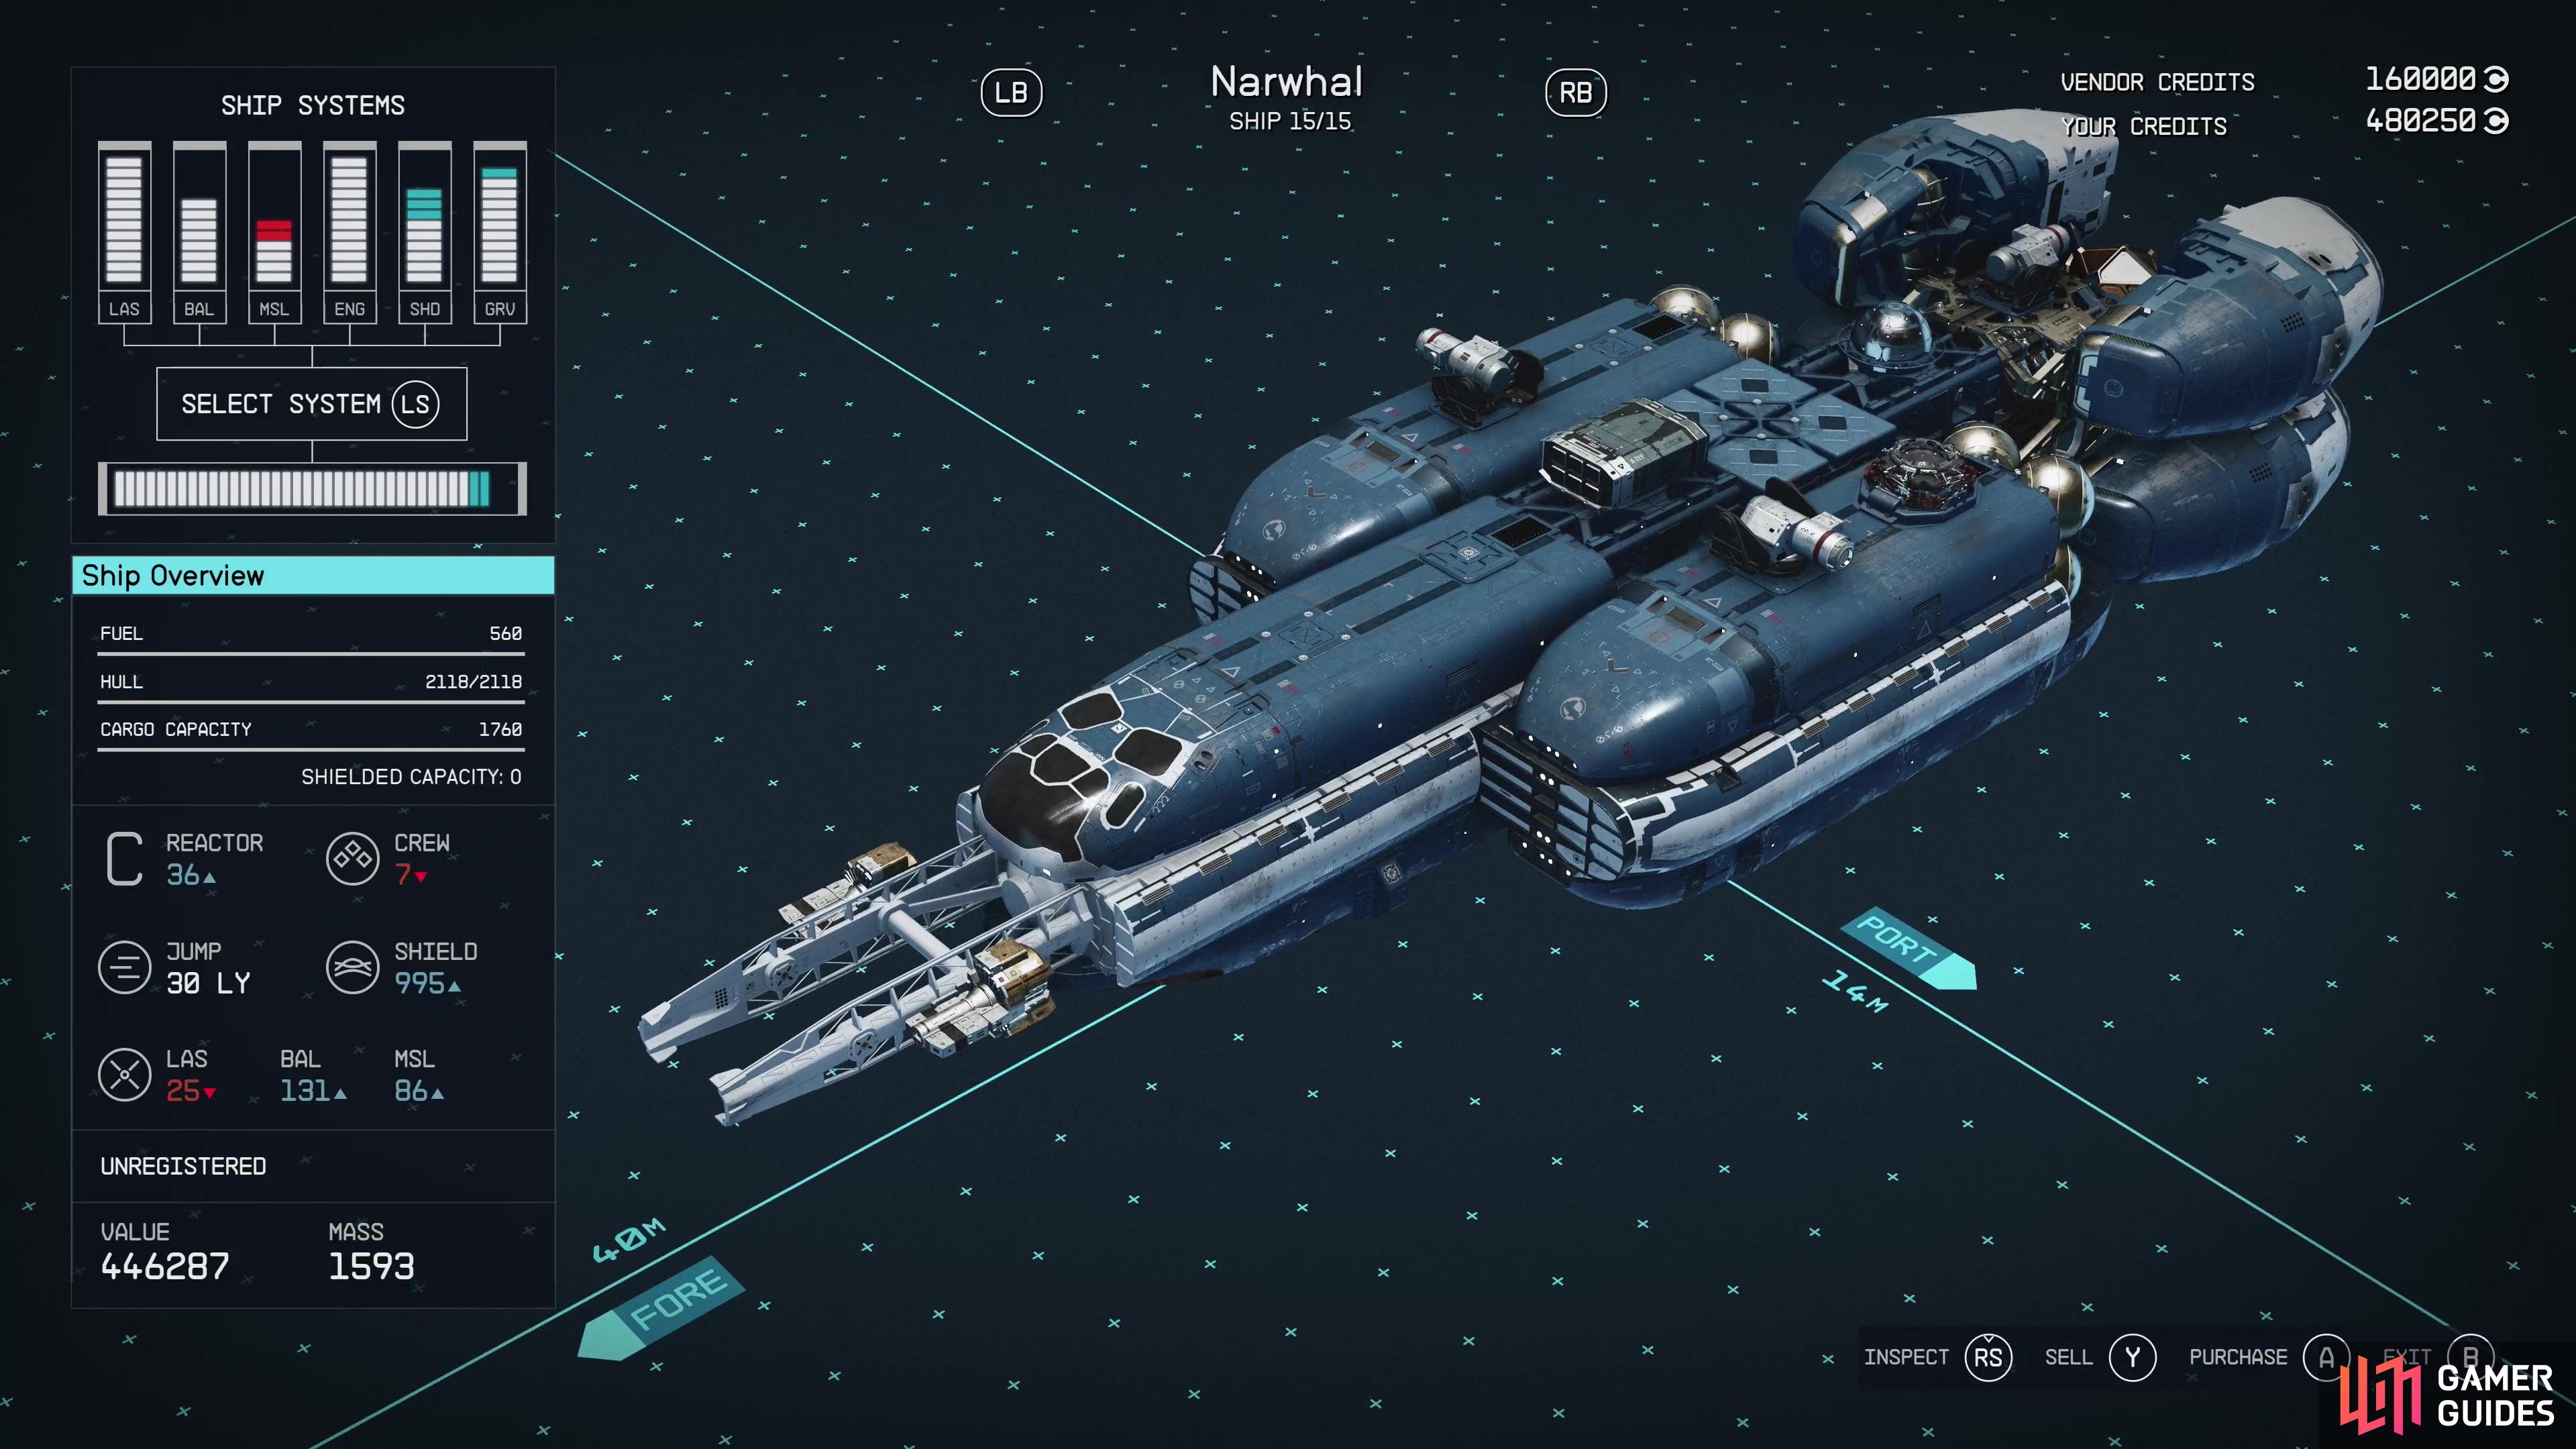 who will sell the Narwhal for a hefty 450,000 credits.